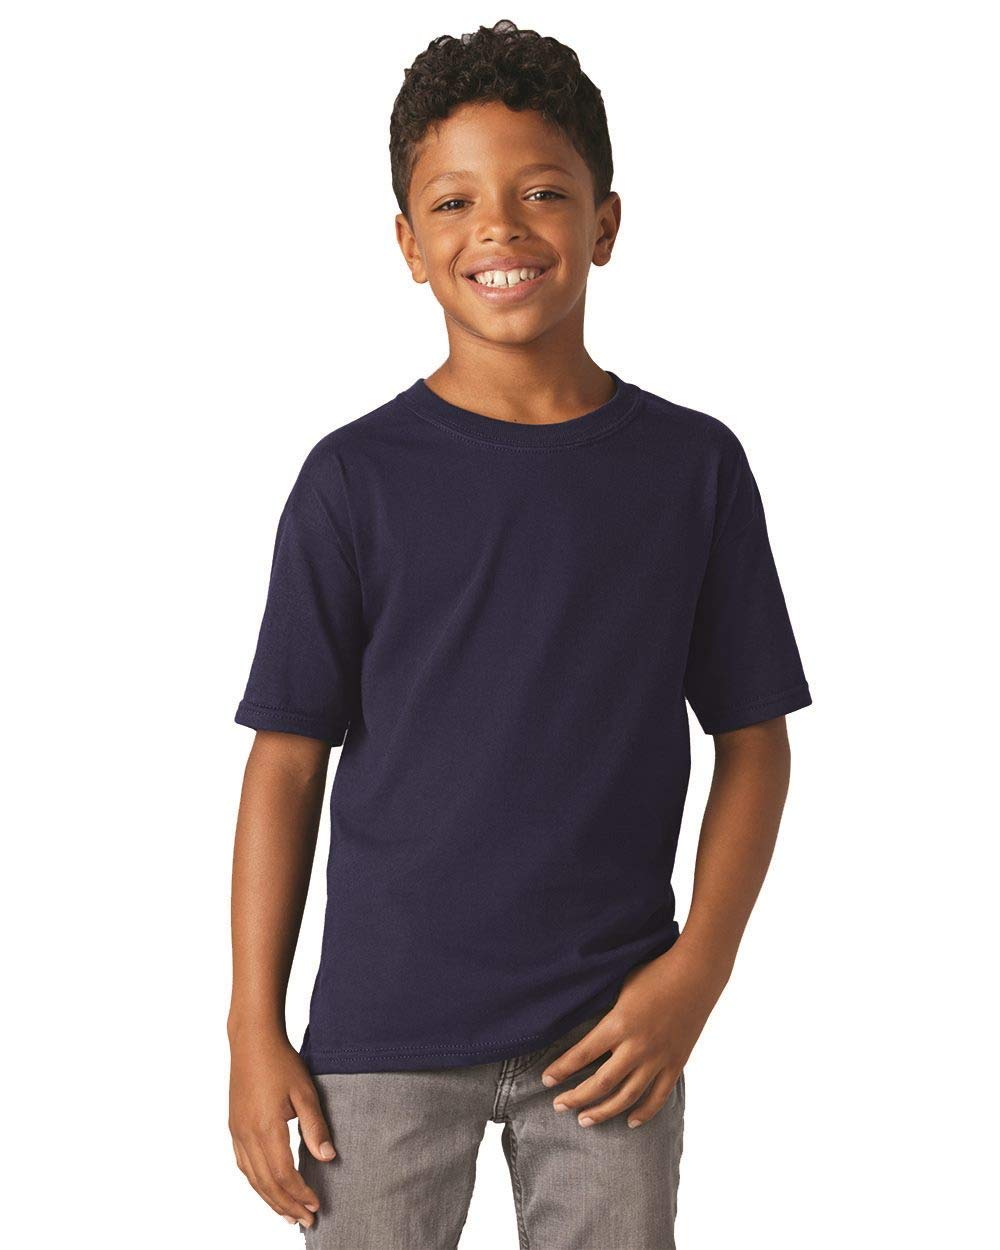 Fruit of the Loom Boy's Iconic T-Shirt